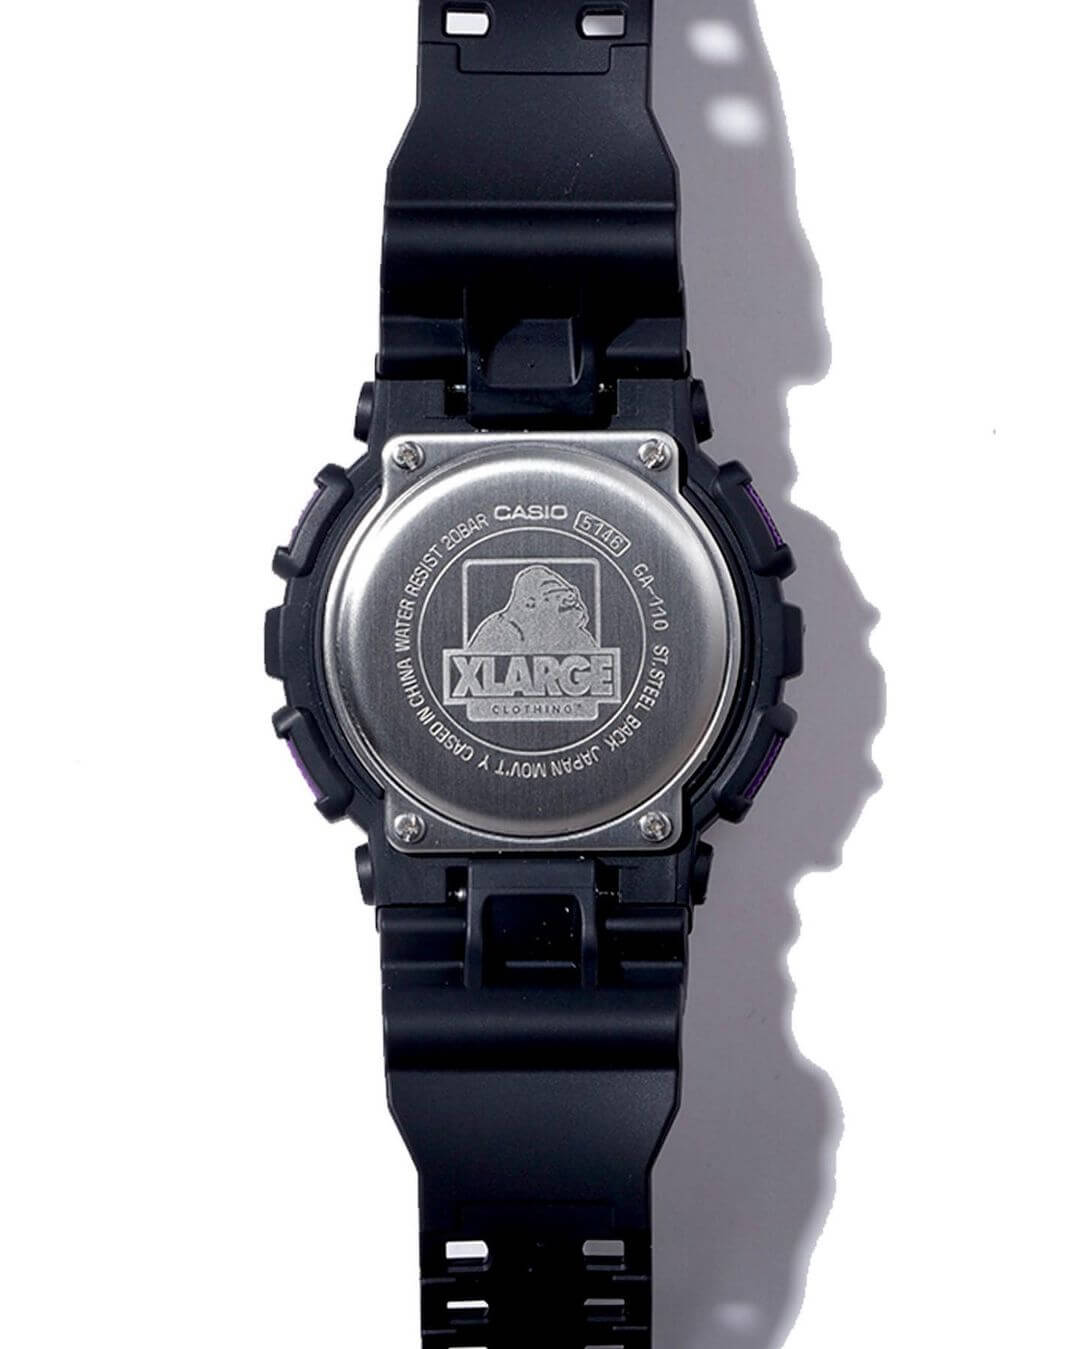 XLARGE x G-Shock GA-110 2021 Collaboration for the L.A. Streetwear 